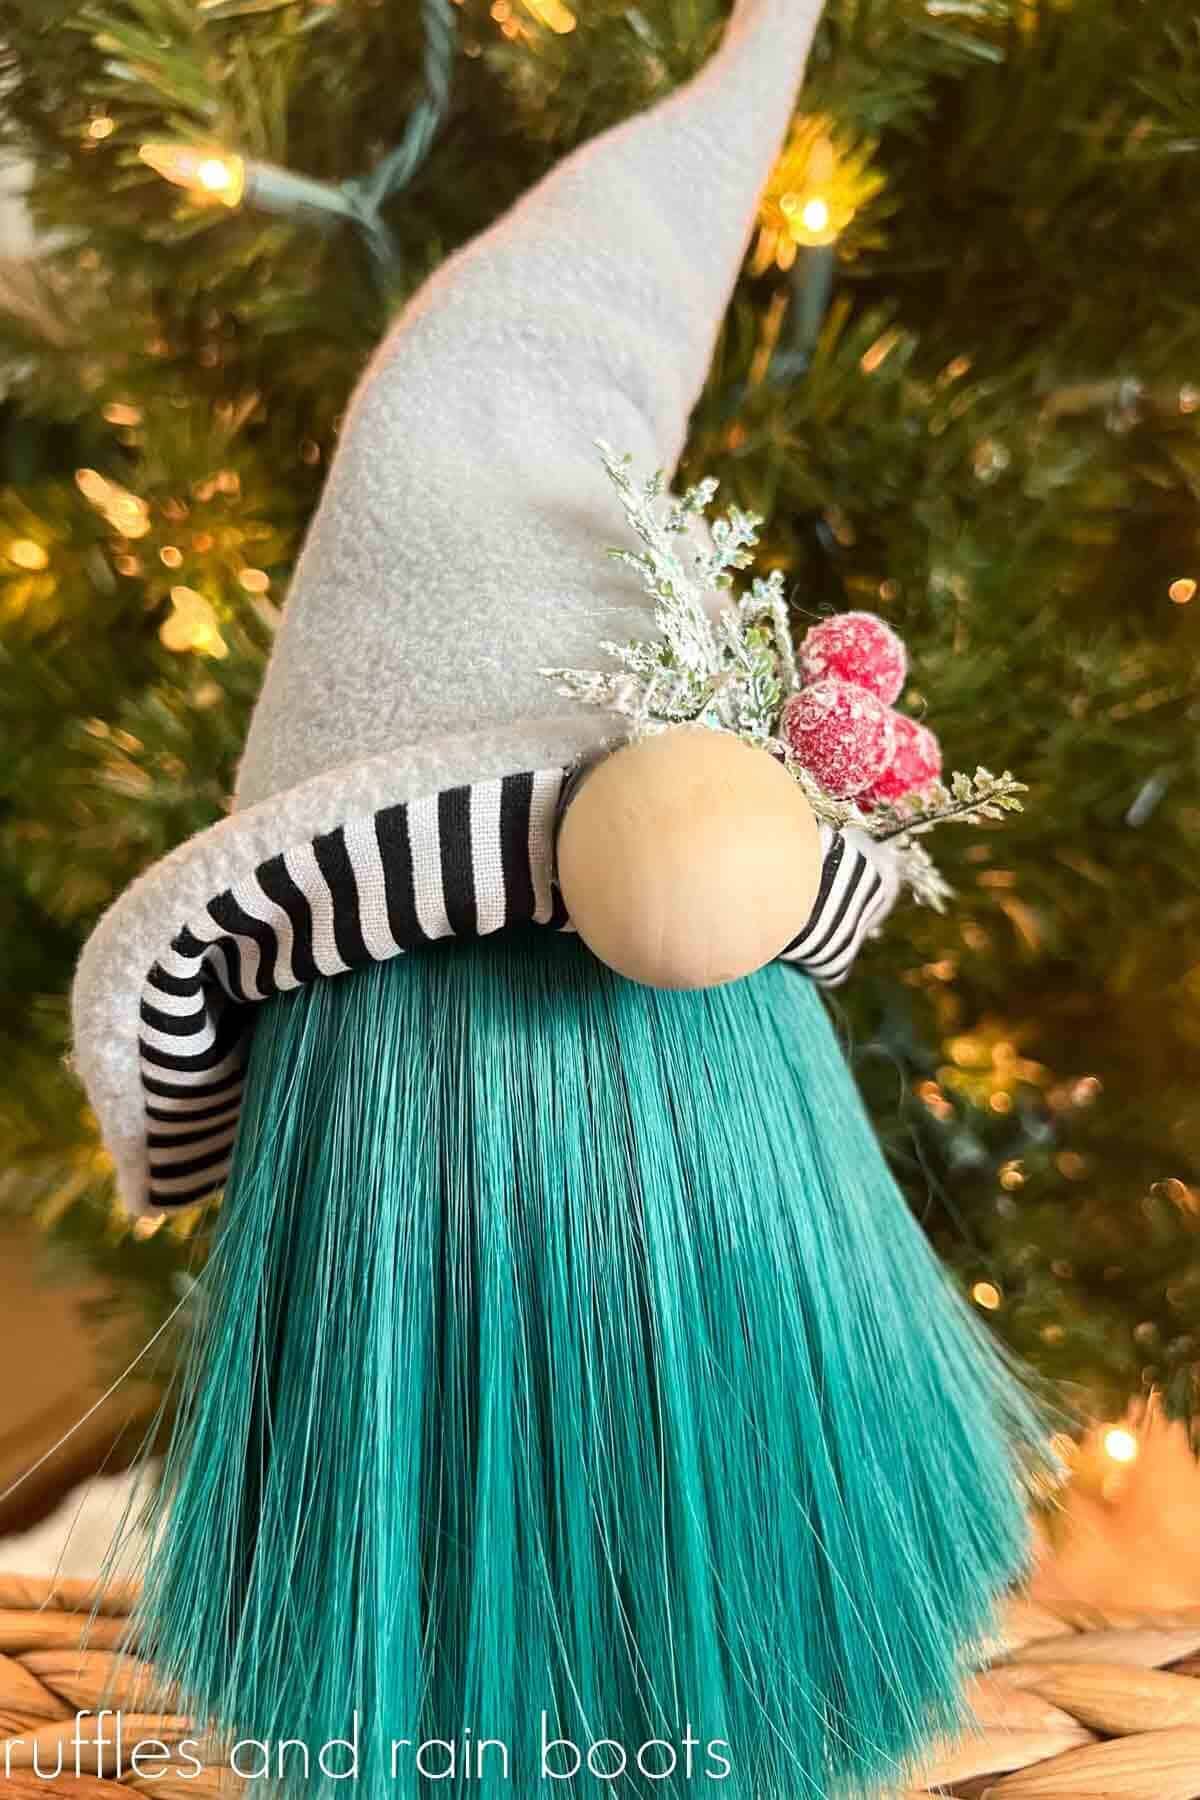 Vertical image of a Christmas gnome with a two sided hat and a gnome beard made of doll hair placed in front of a lit up holiday tree.